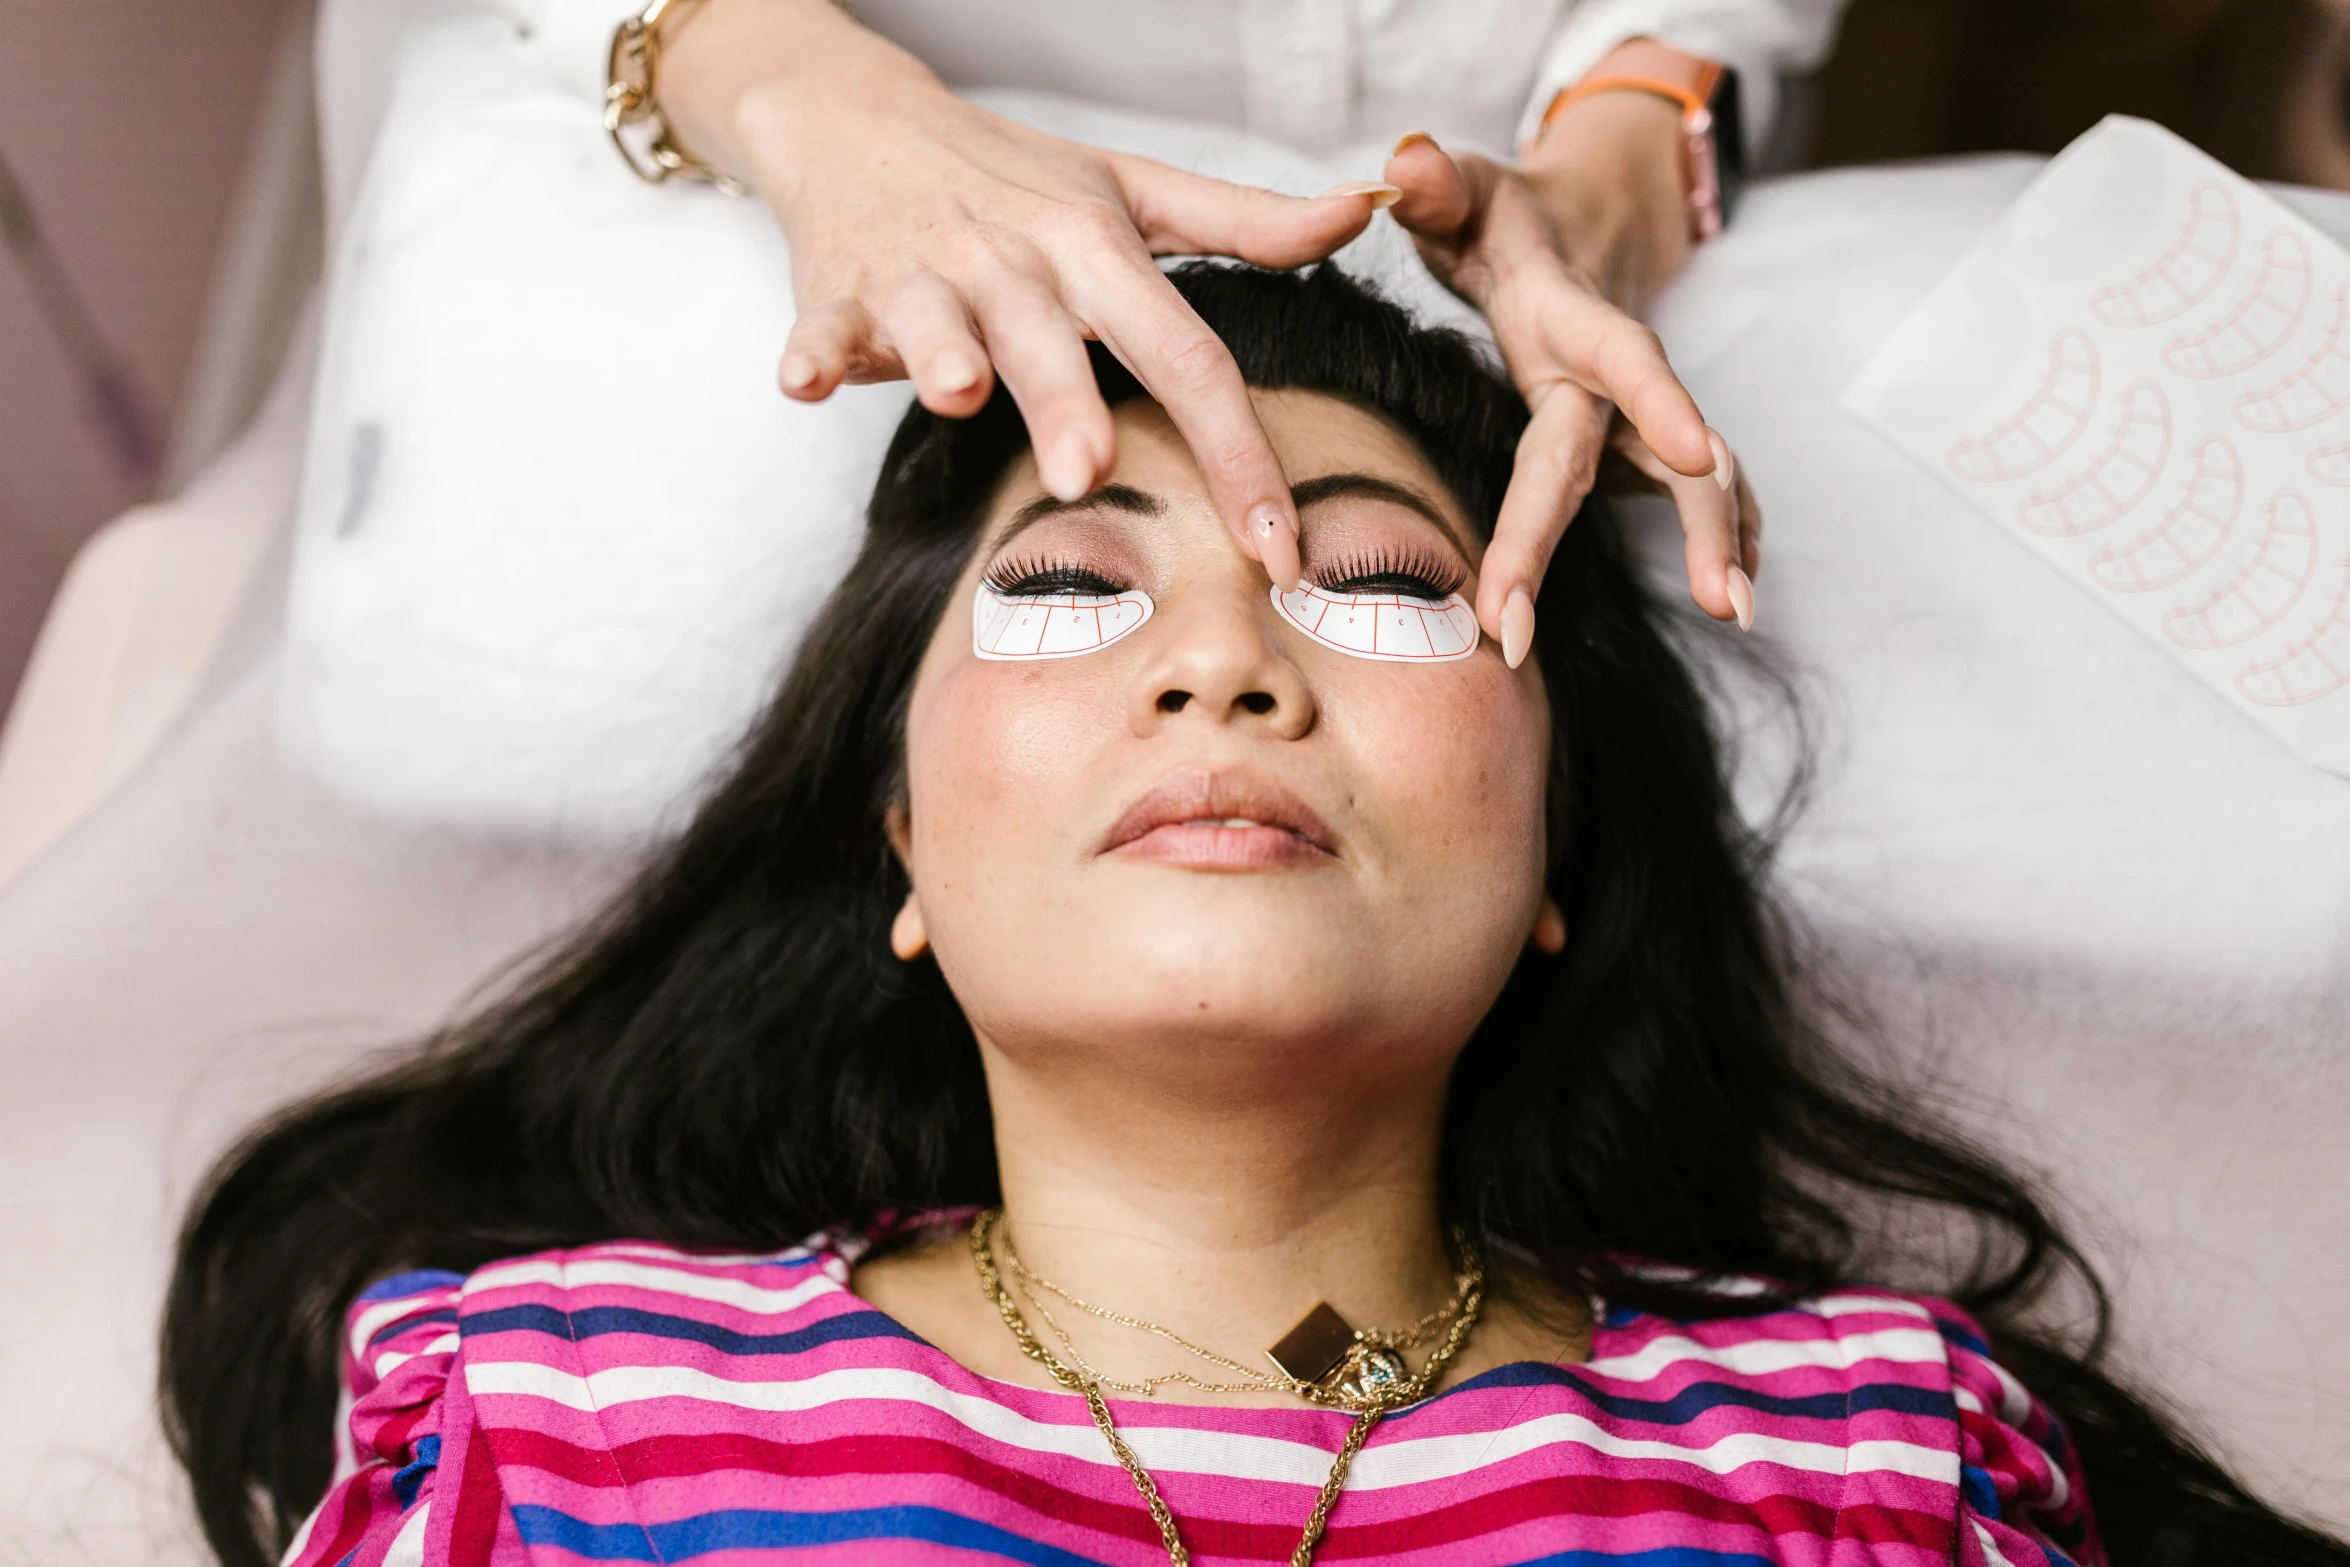 a woman getting her eyebrows done at a beauty salon, by Julia Pishtar, opening third eye, manuka, lying down, blind eyes